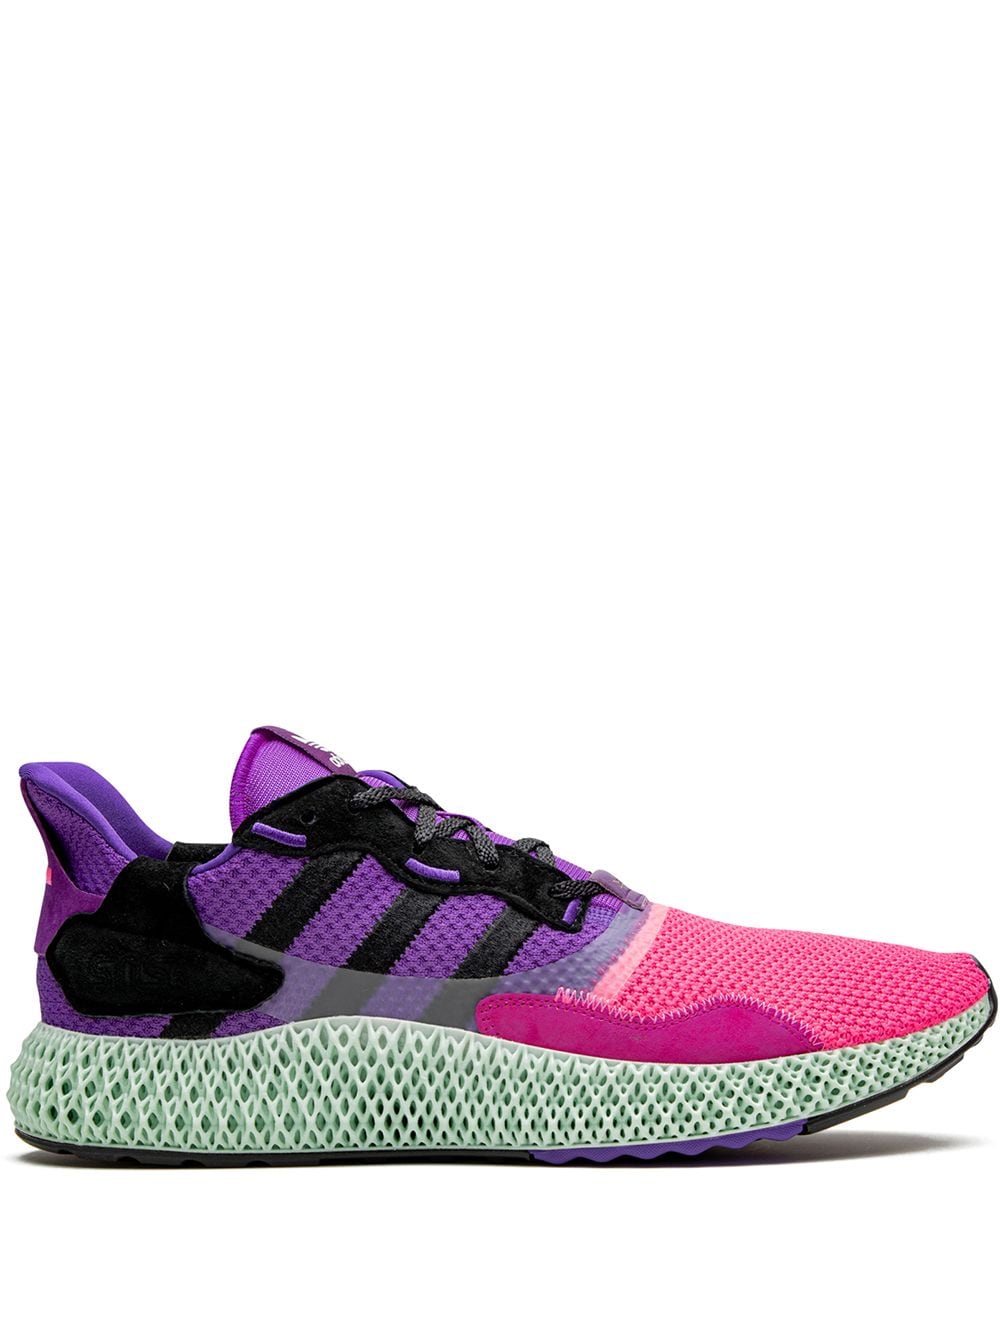 Shop purple \u0026 pink adidas x Sneakersnstuff ZX 4000 4D 'Sunset' sneakers  with Express Delivery - Farfetch